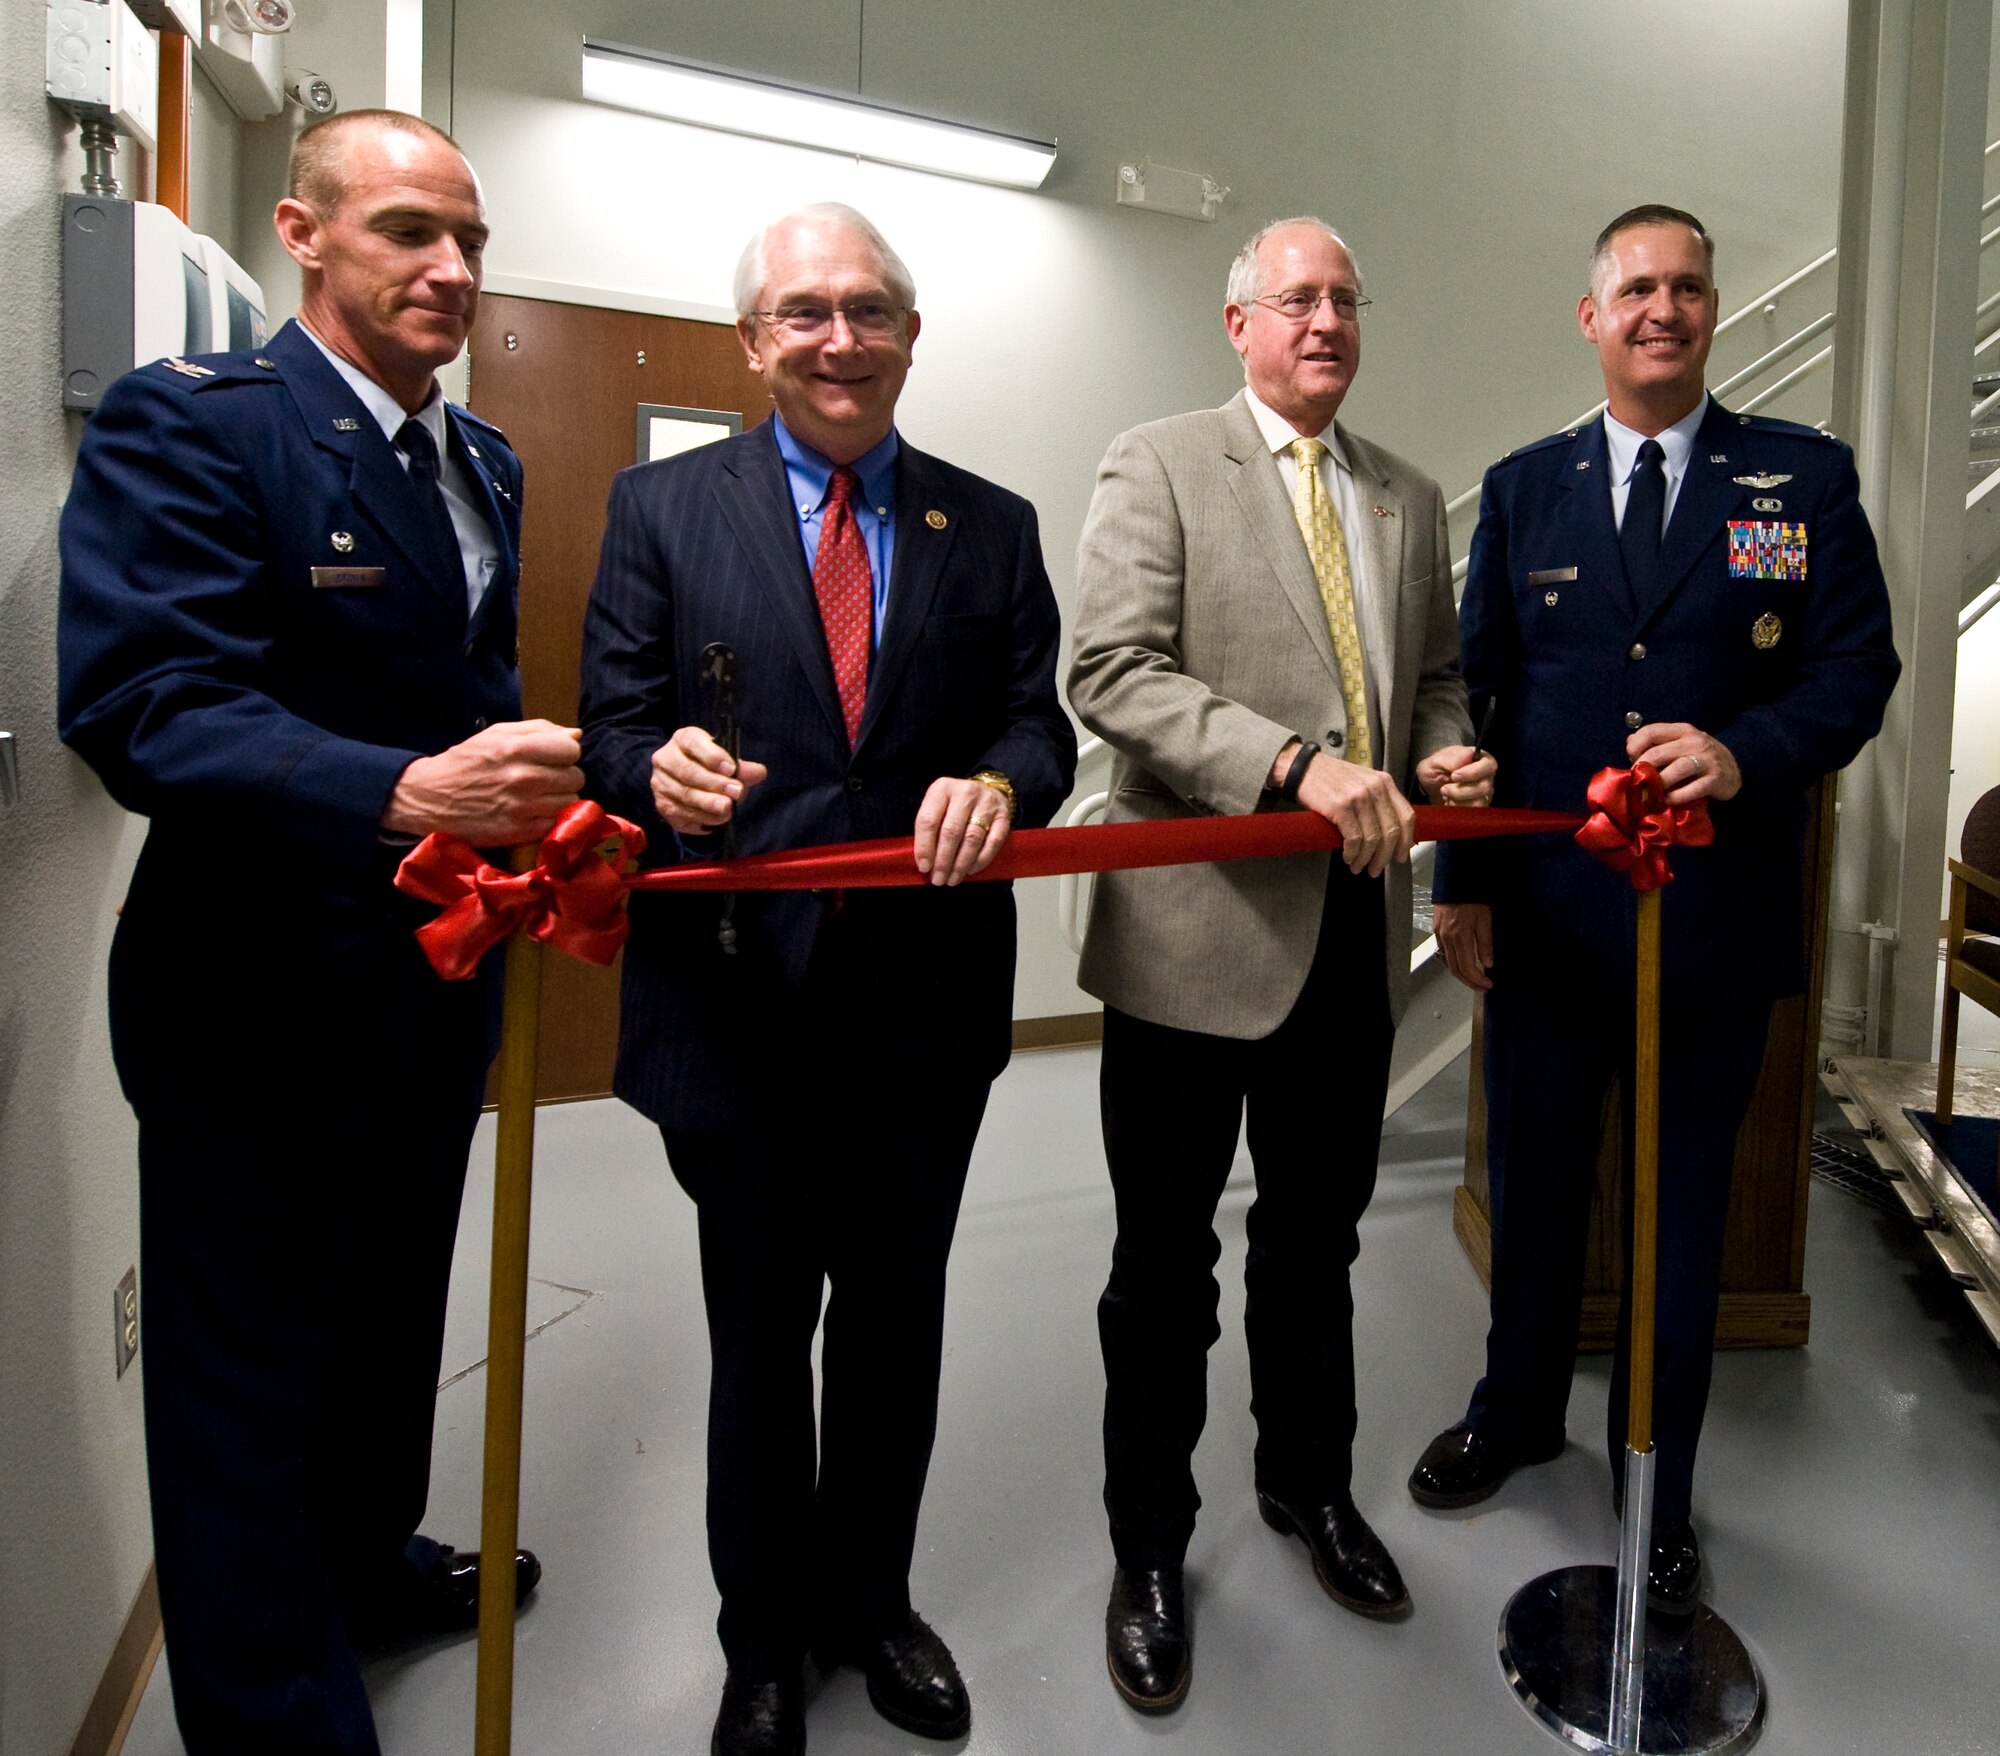 U.S. Air Force Col. Jeffrey Brown, left, U.S. Reps. Randy Neugebauer and Mike Conaway, center, and Col. Steven Beasley, cut the ribbon to mark the activation of the new C-130J Super Hercules simulator April 22, 2014, at Dyess Air Force Base, Texas. The new simulator will be used to build and maintain operator proficiency in the aircraft throughout multiple mission sets, including those not readily available during local flying missions. (U.S. Air Force photo by Staff Sgt. Richard Ebensberger/Released)